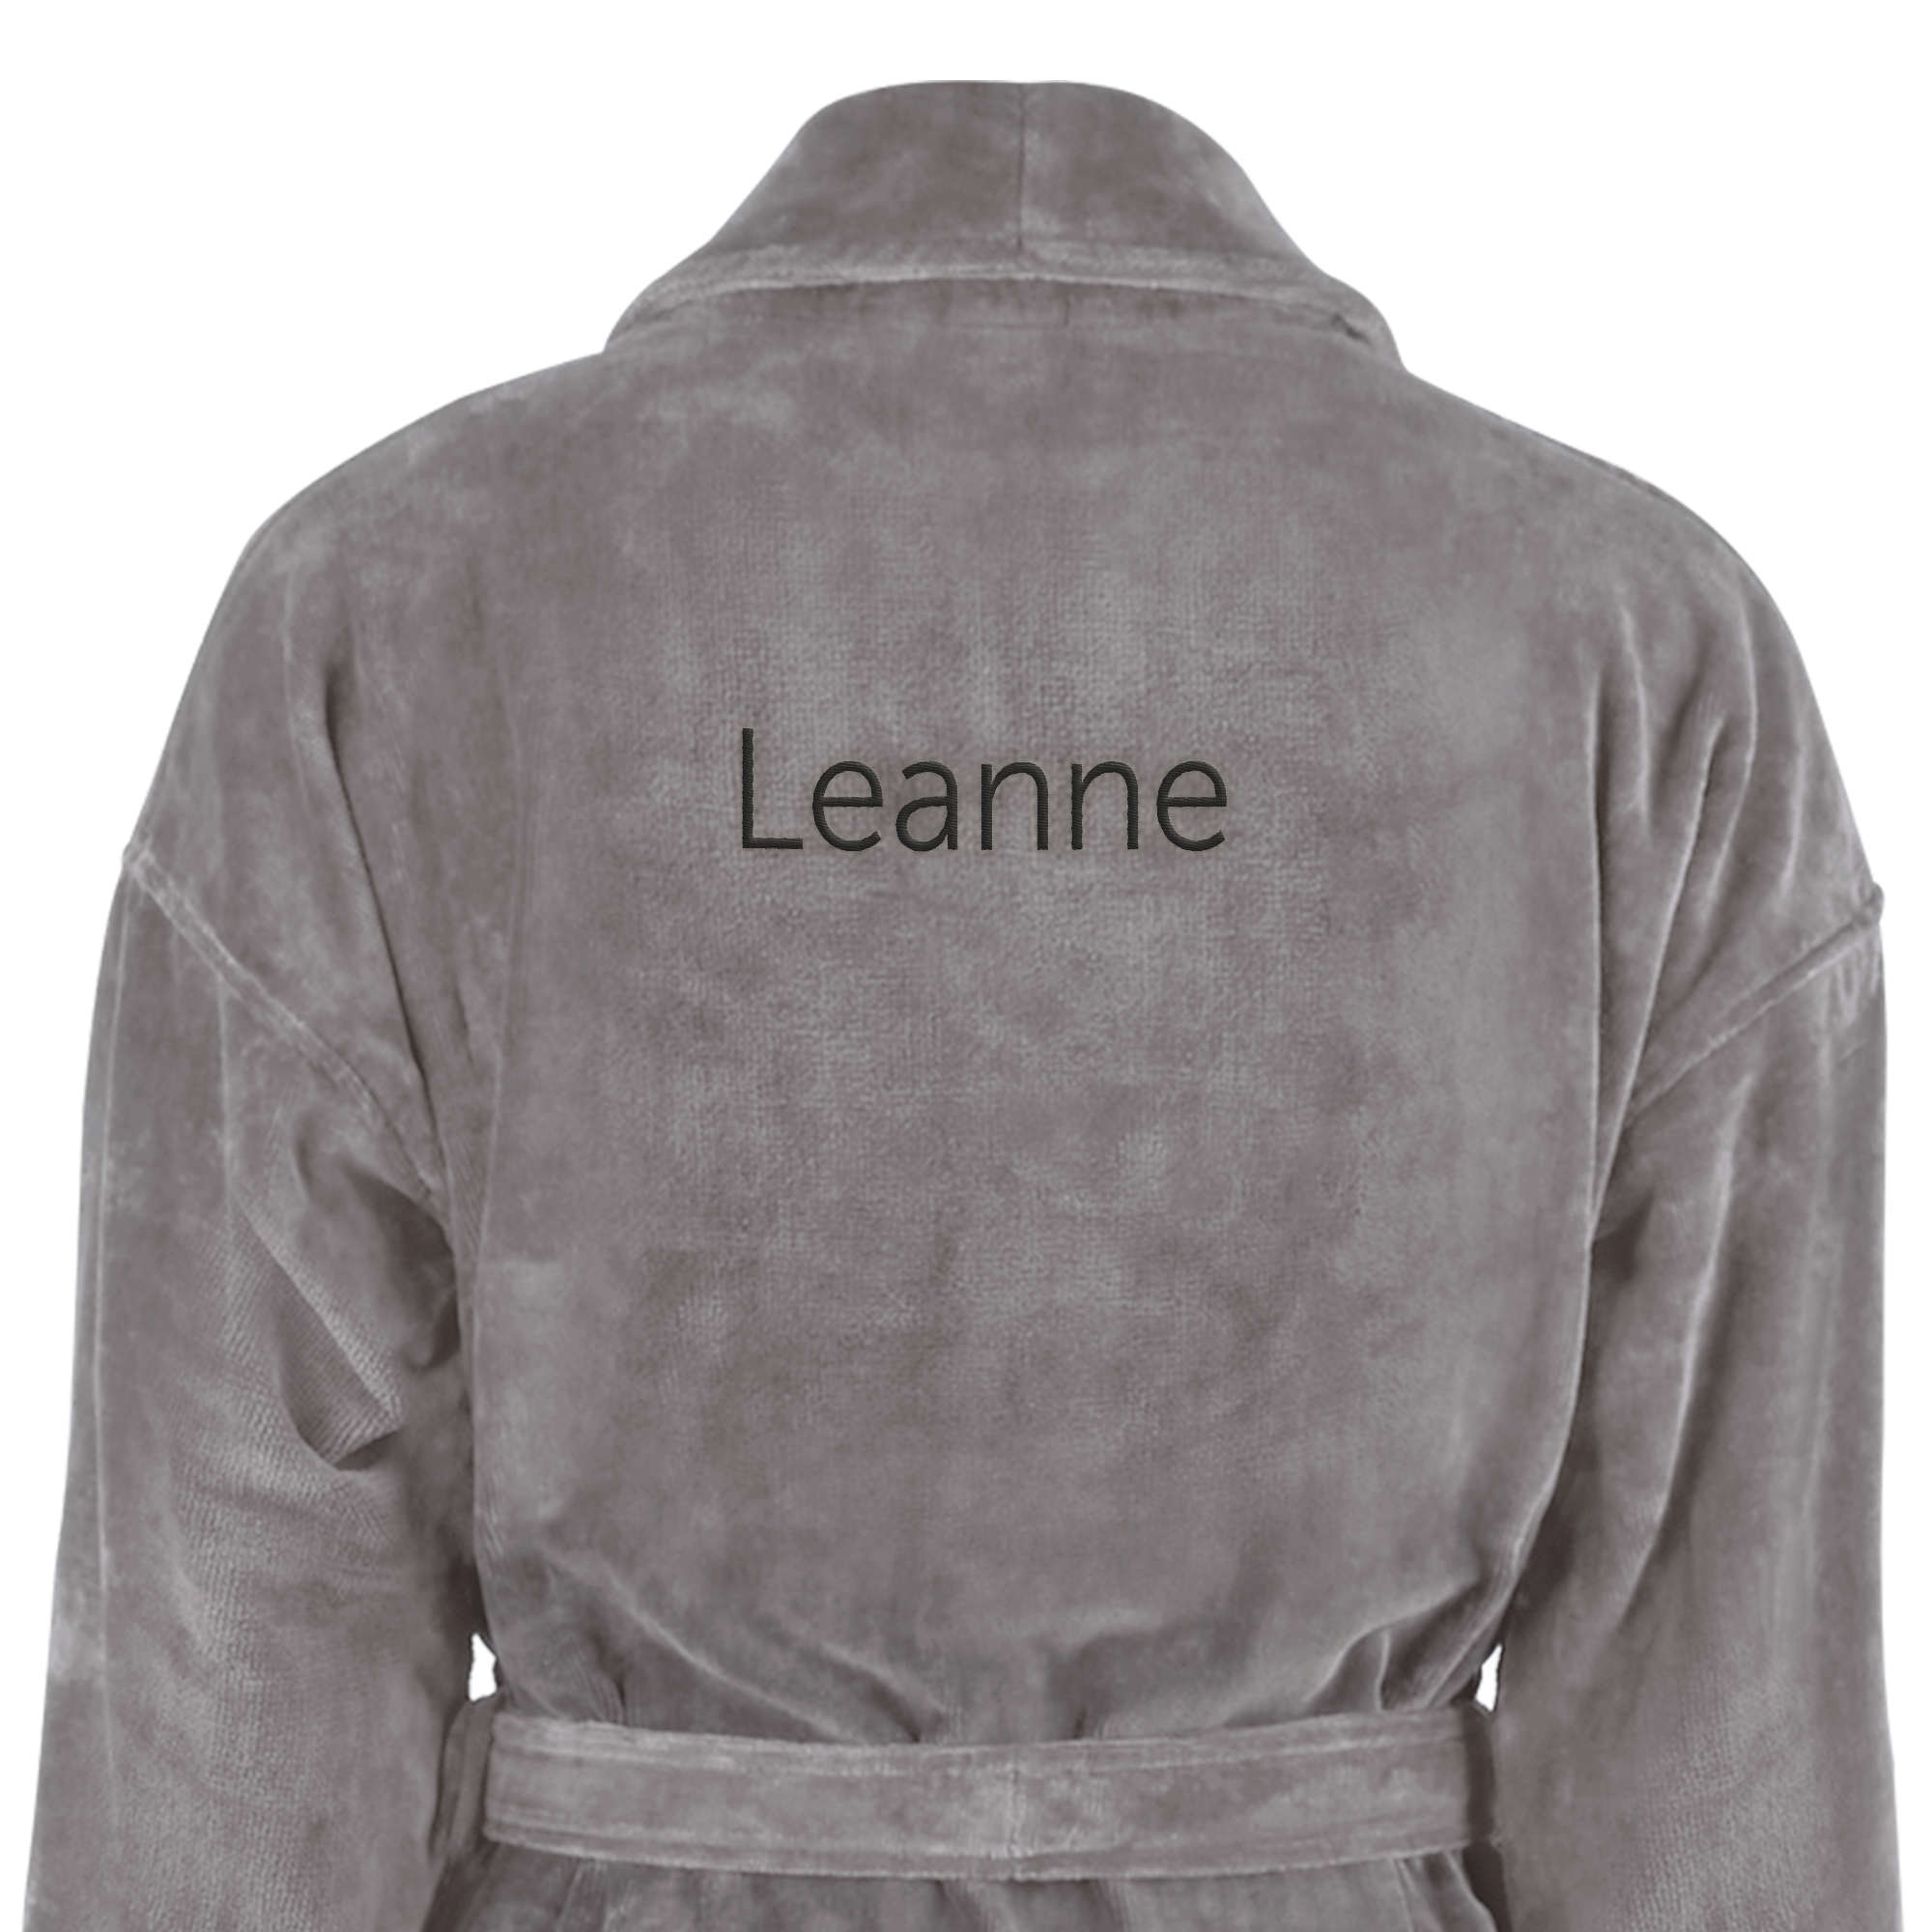 Bathrobe for Women - Grey S/M With Text